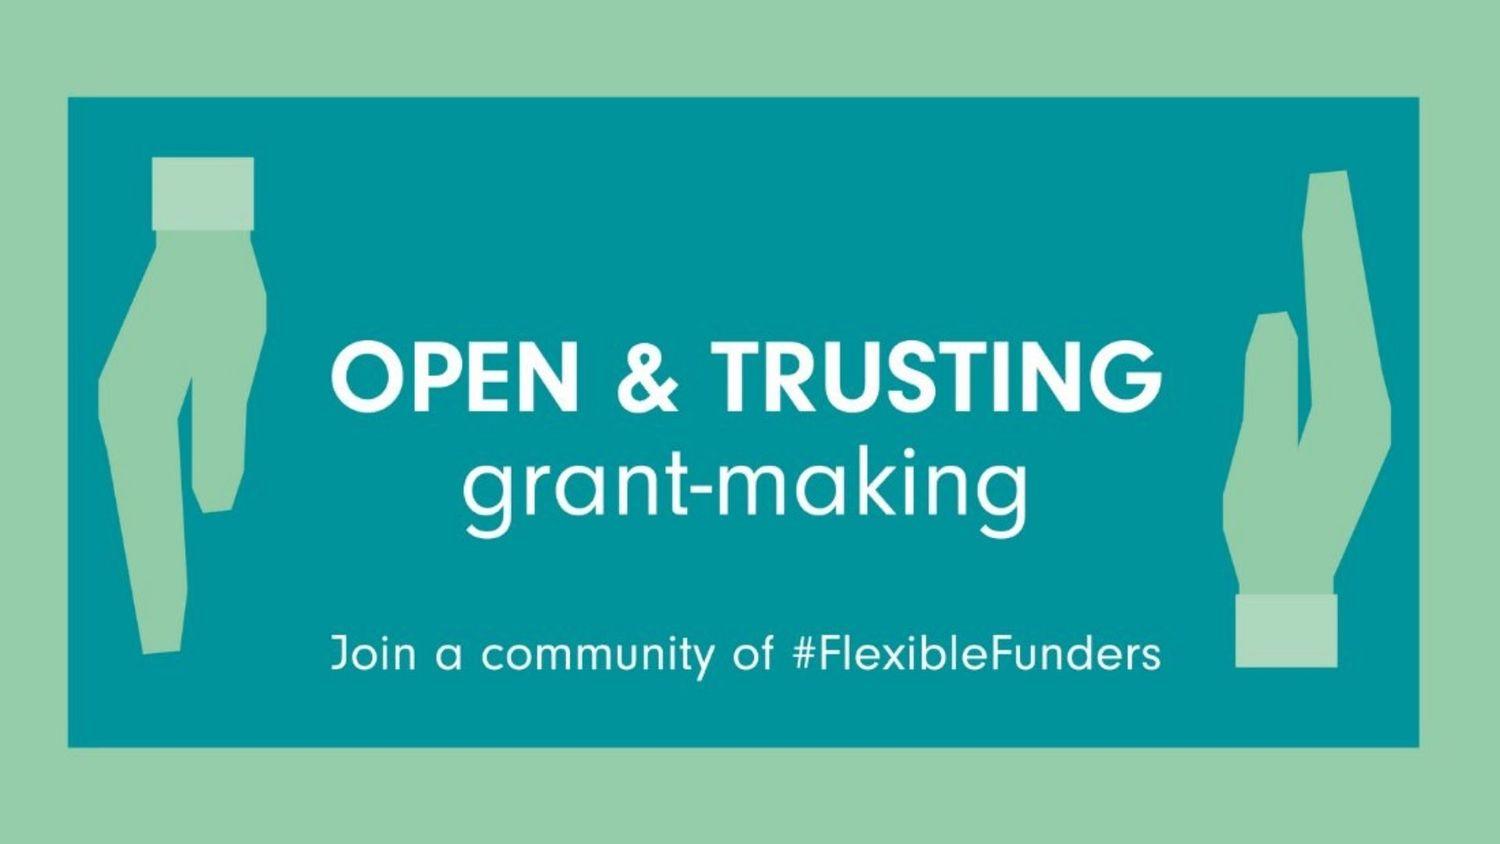 The Foundation commits to being more open and trusting